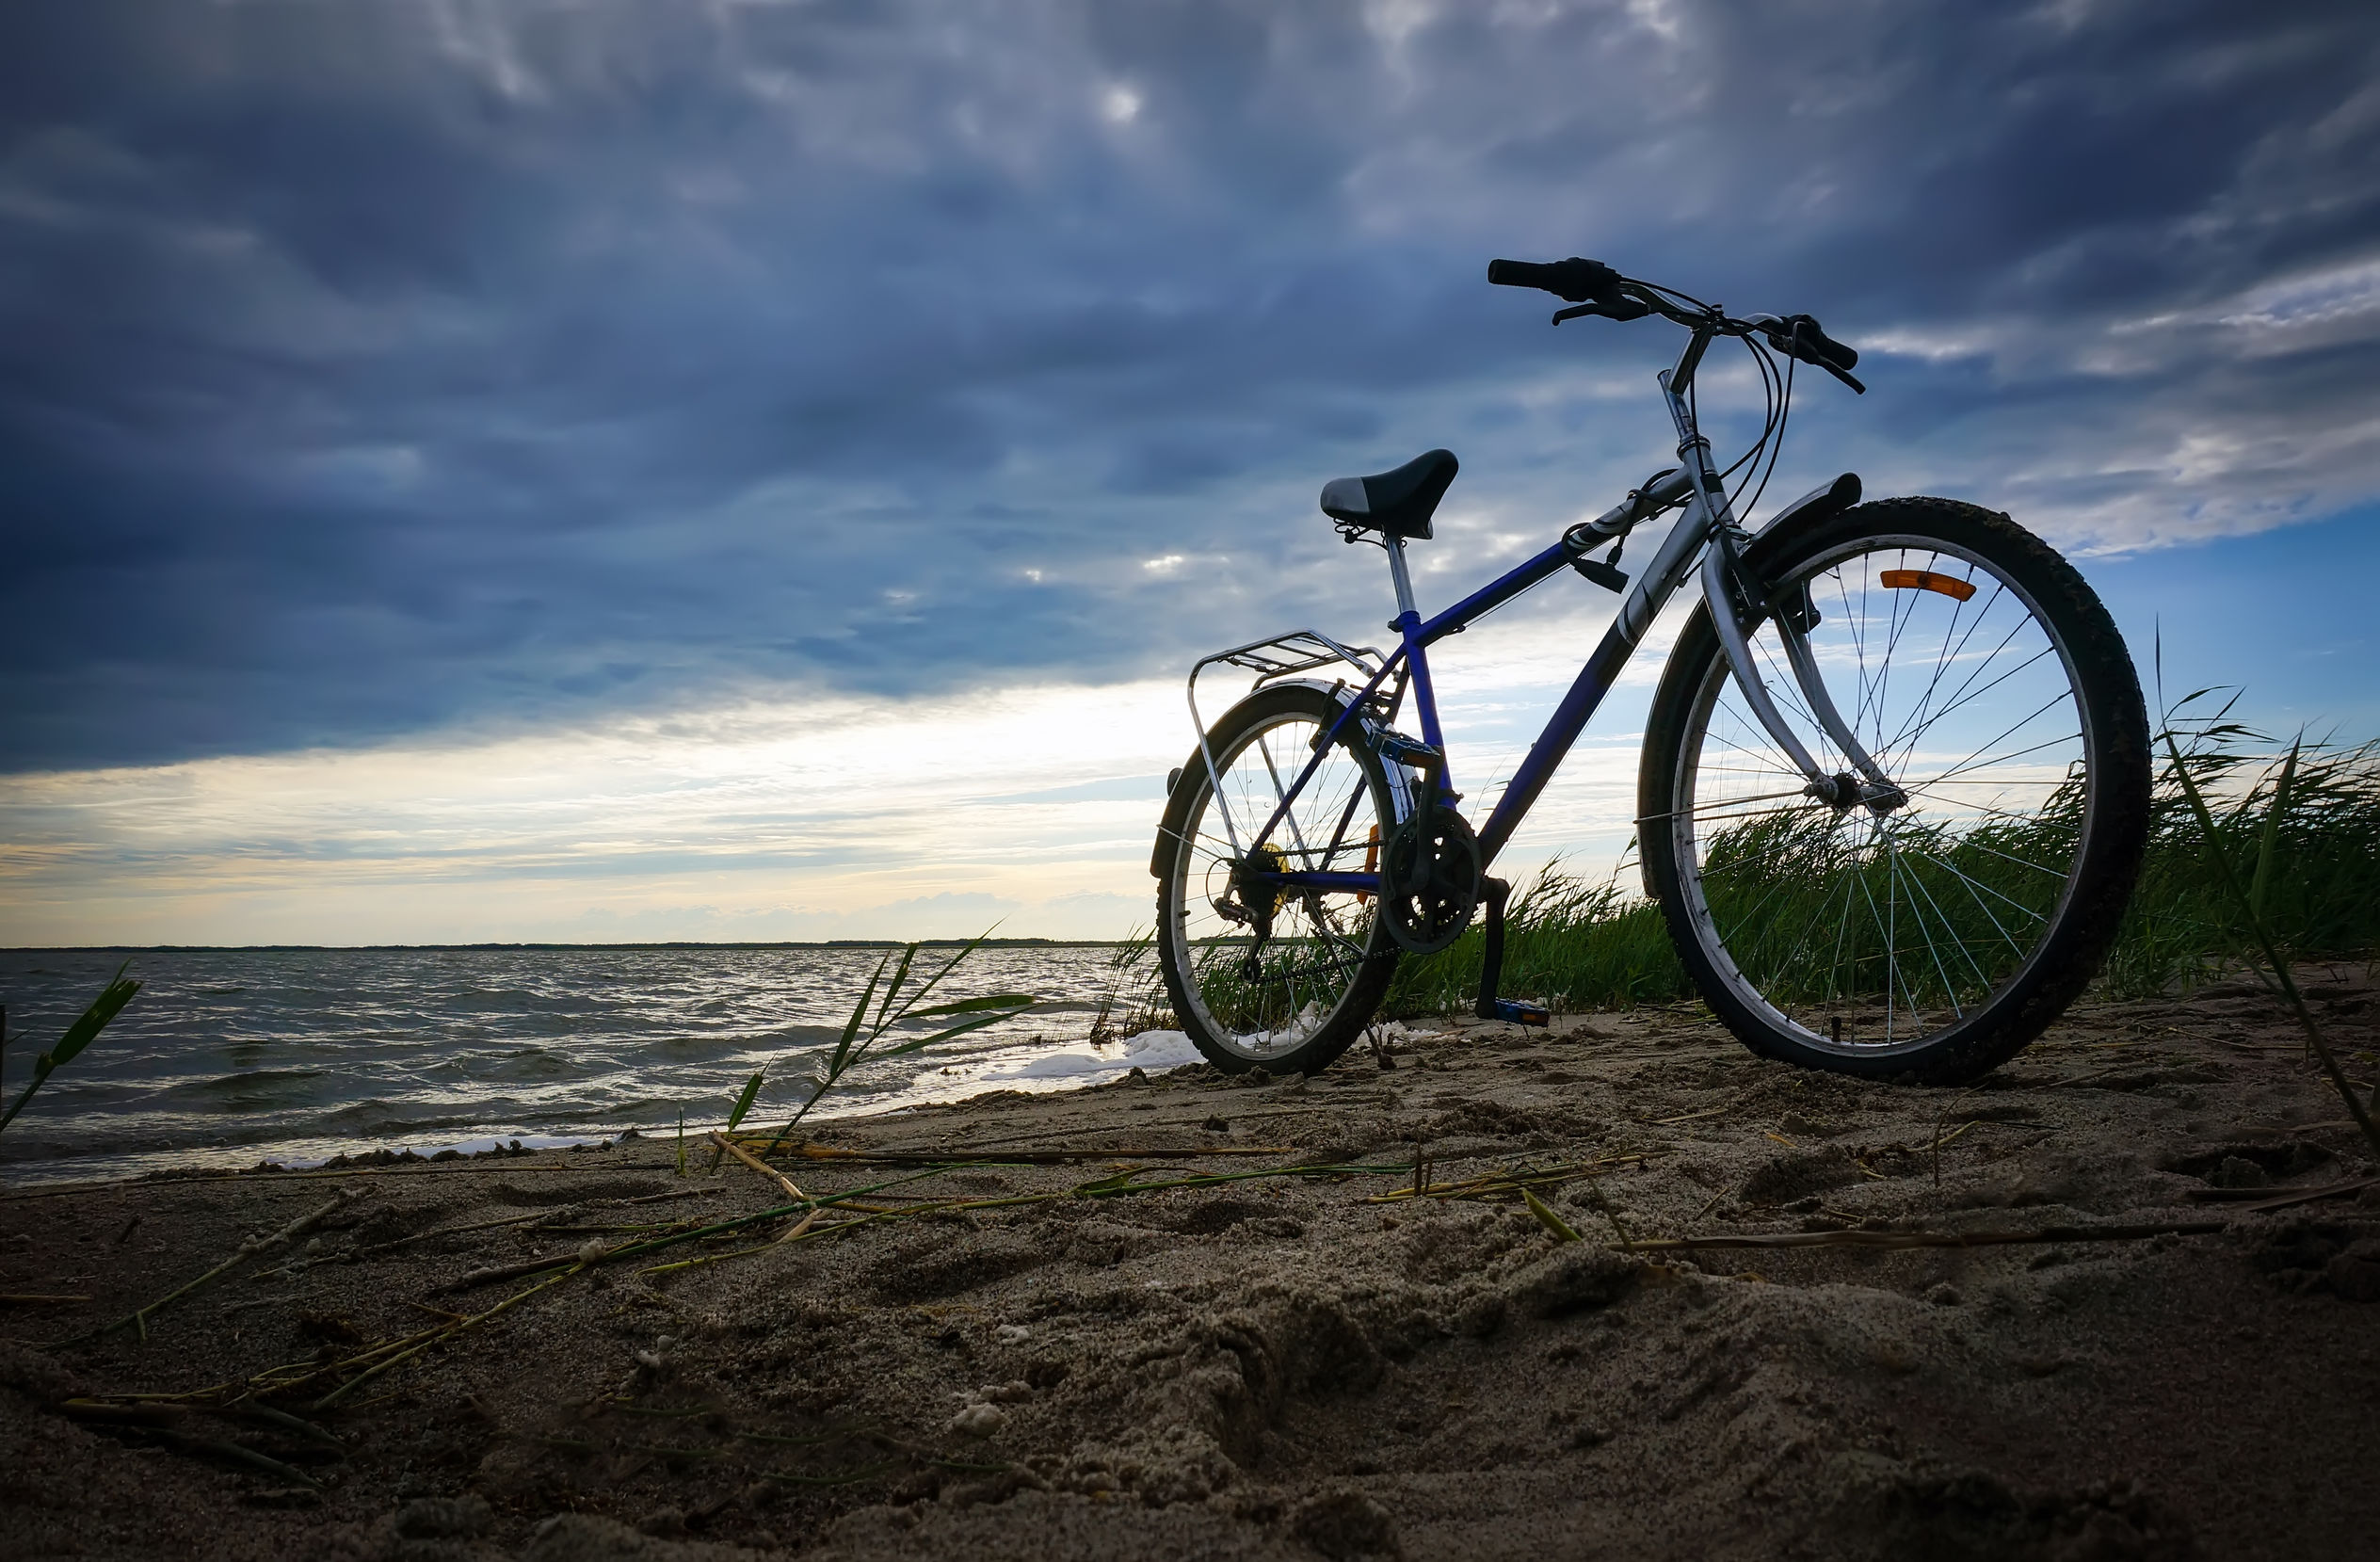 bicycle alone on a beach